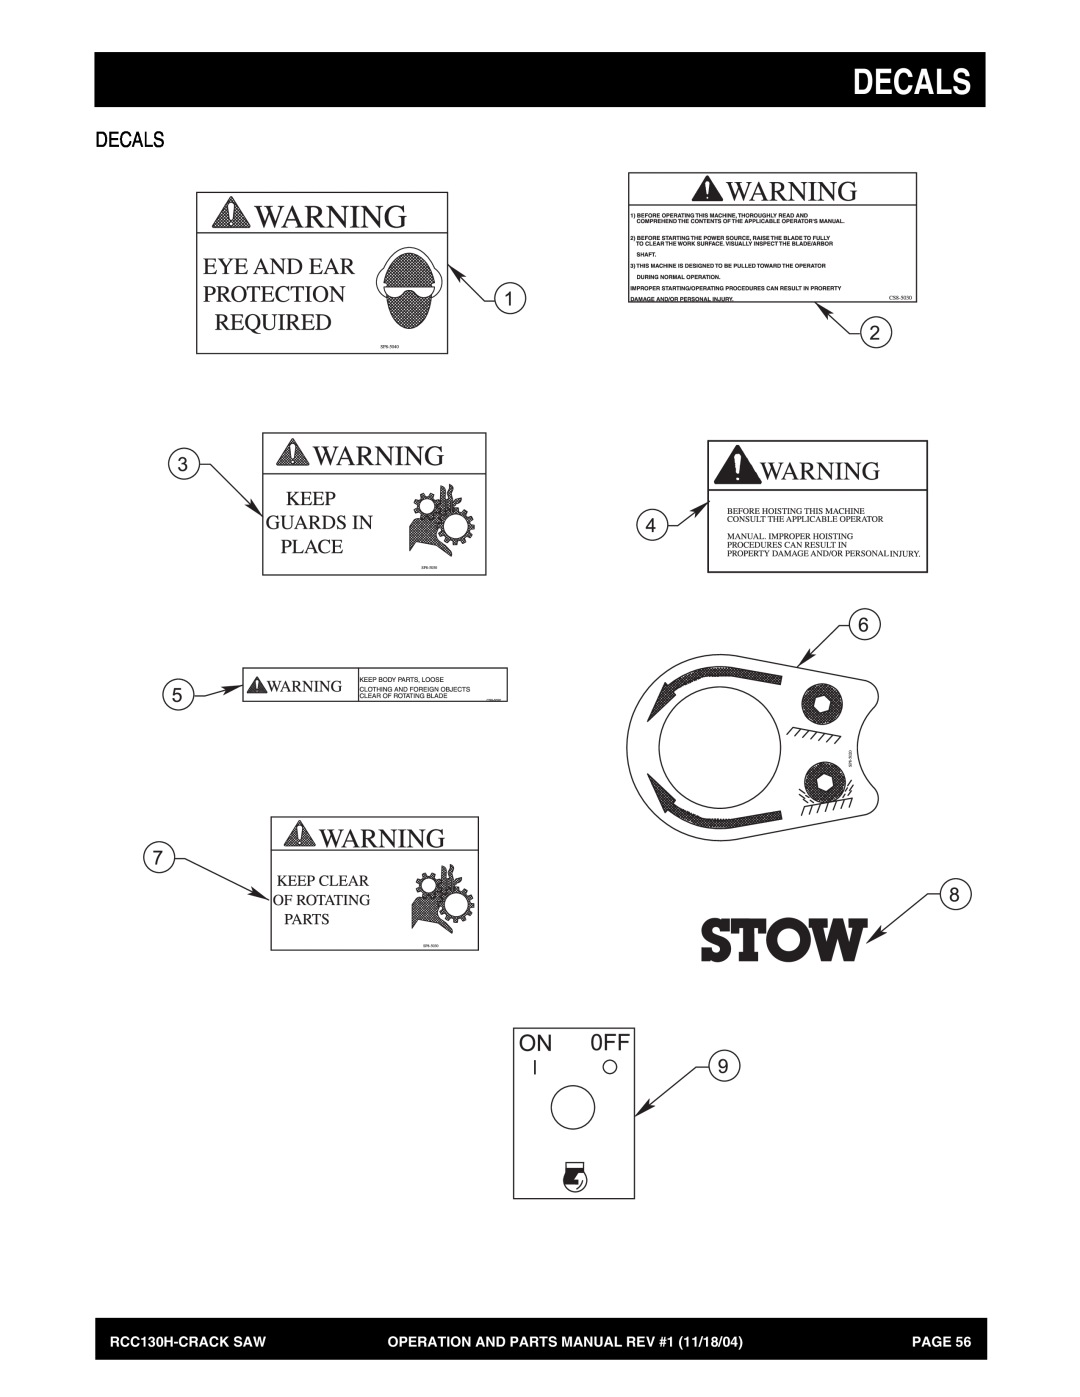 Stow manual Decals, RCC130H-CRACK SAW, OPERATION AND PARTS MANUAL REV #1 11/18/04, Page 